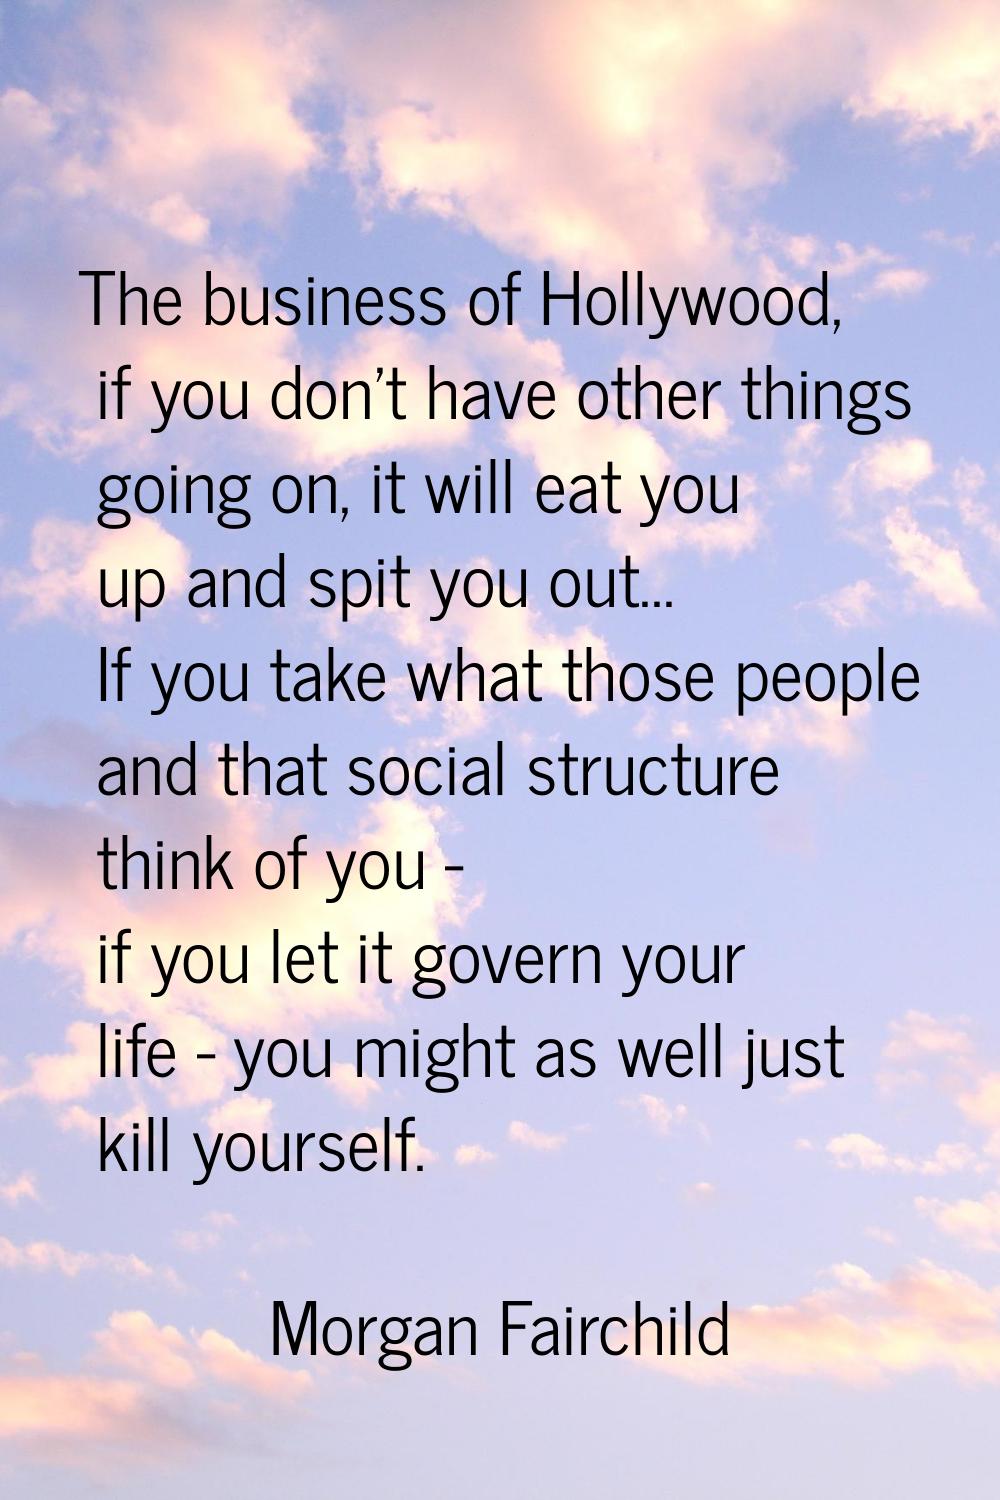 The business of Hollywood, if you don't have other things going on, it will eat you up and spit you